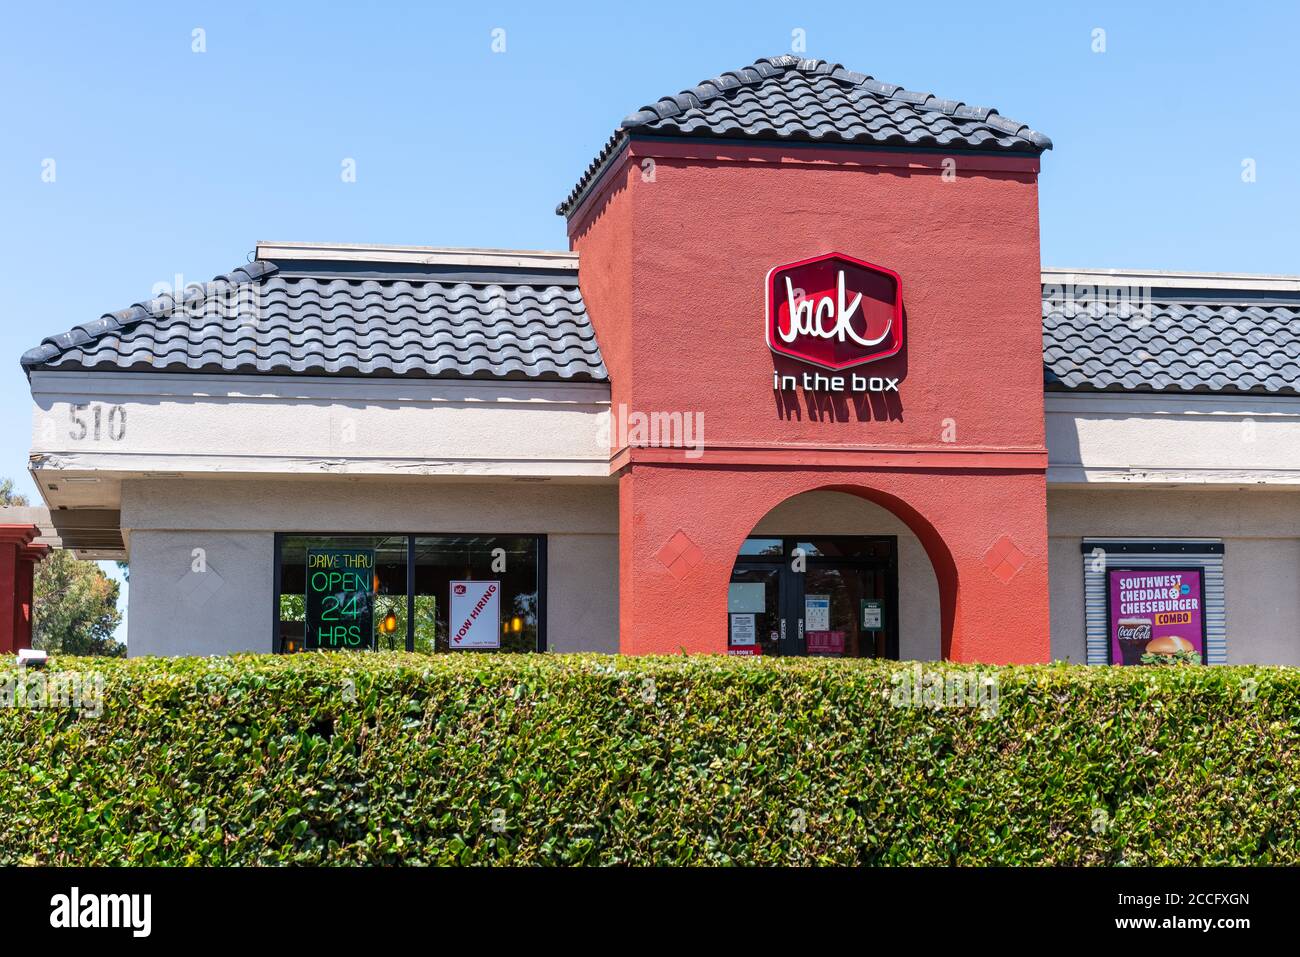 August 3, 2020 Mountain View / CA / USA - Jack in the box location in San Francisco bay area Stock Photo